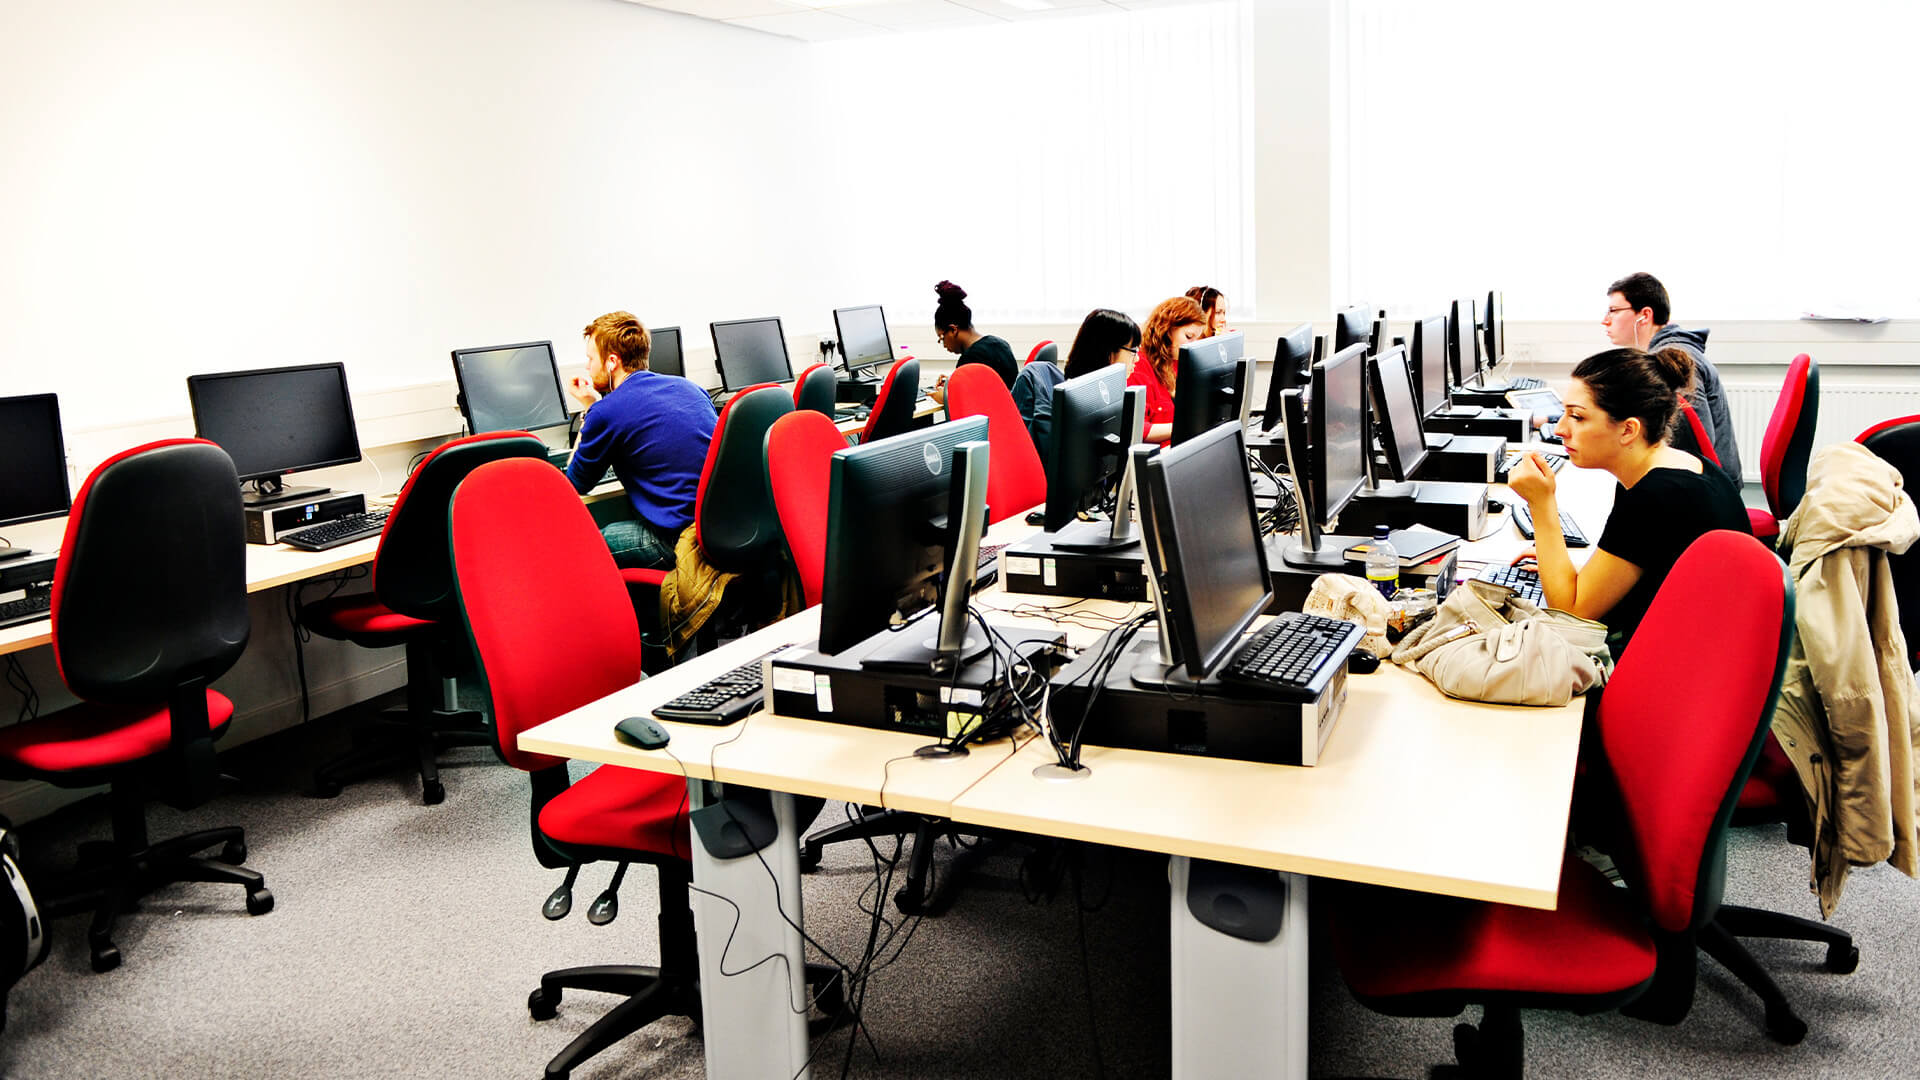 There are 3,000 computers across the University of Manchester campus 